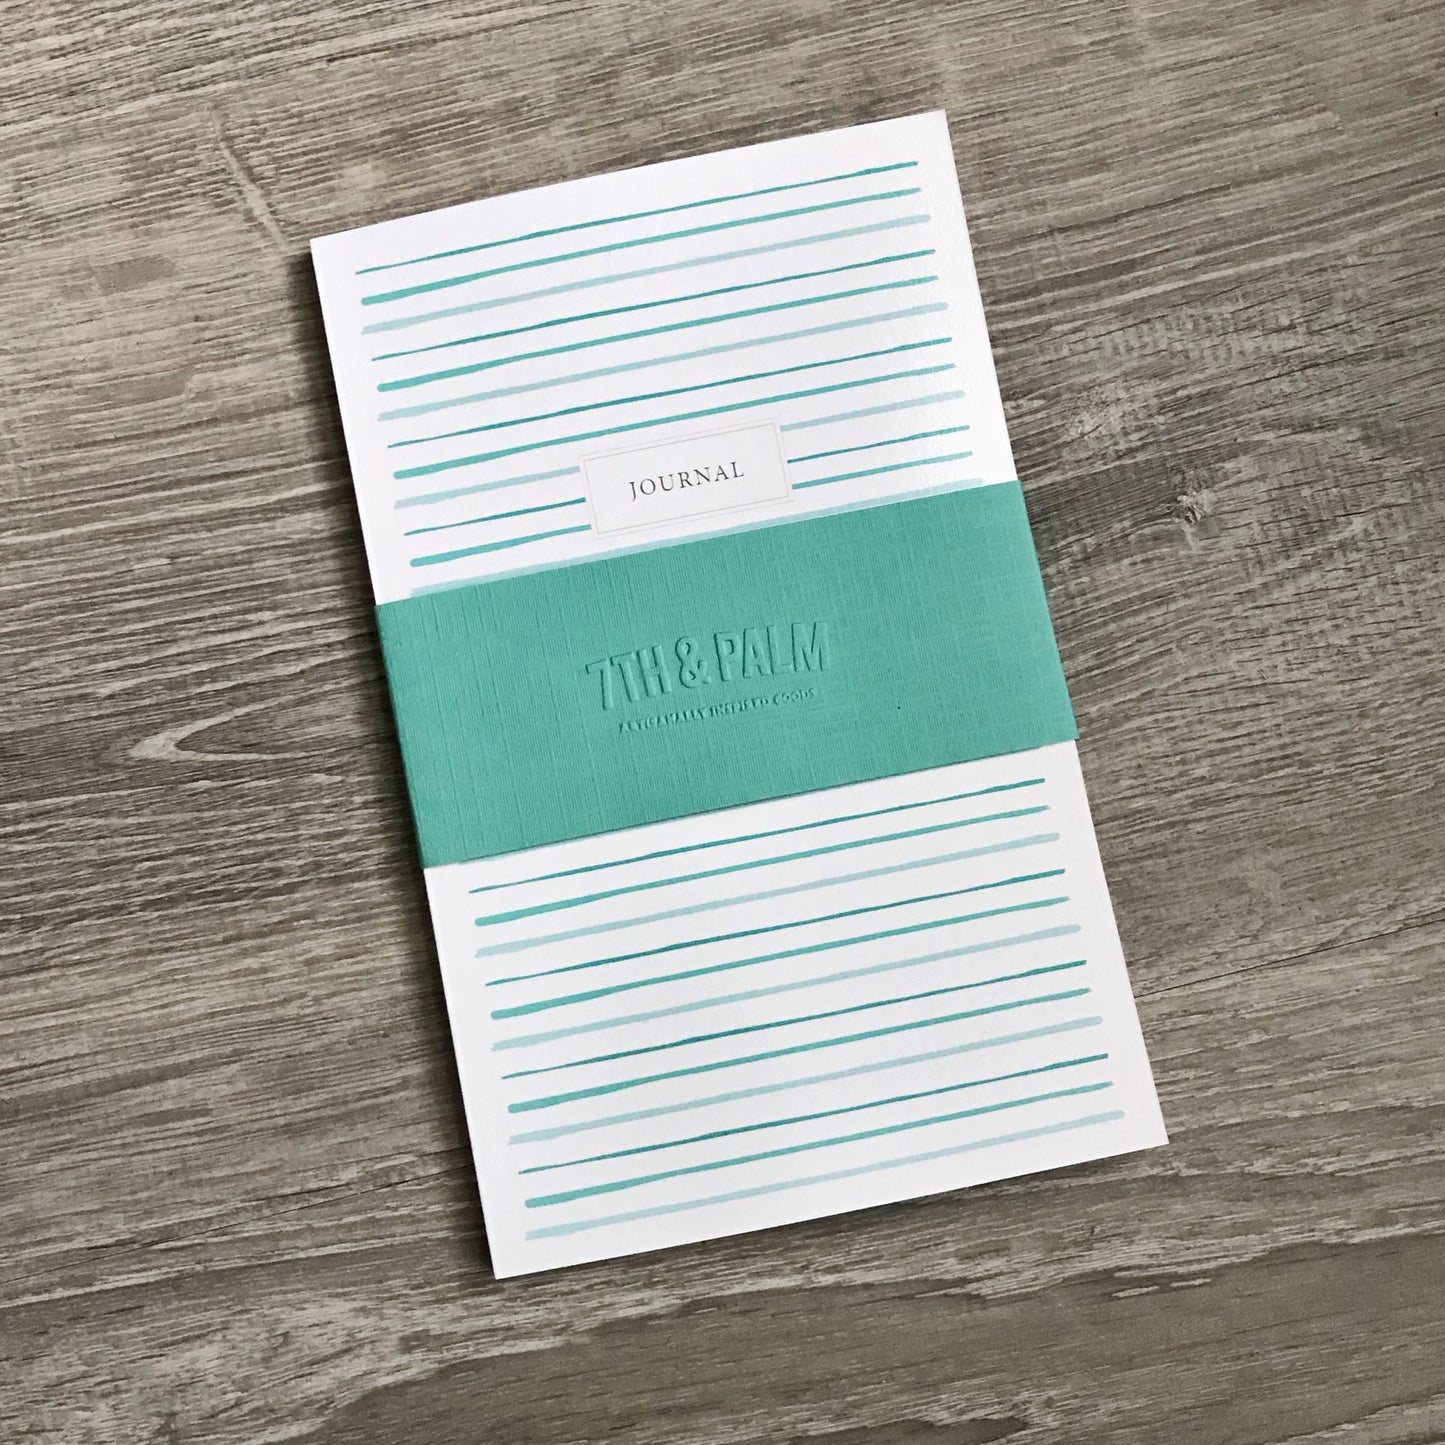 Cabana Stripe Journal | Journals & Notebooks by 7th & Palm